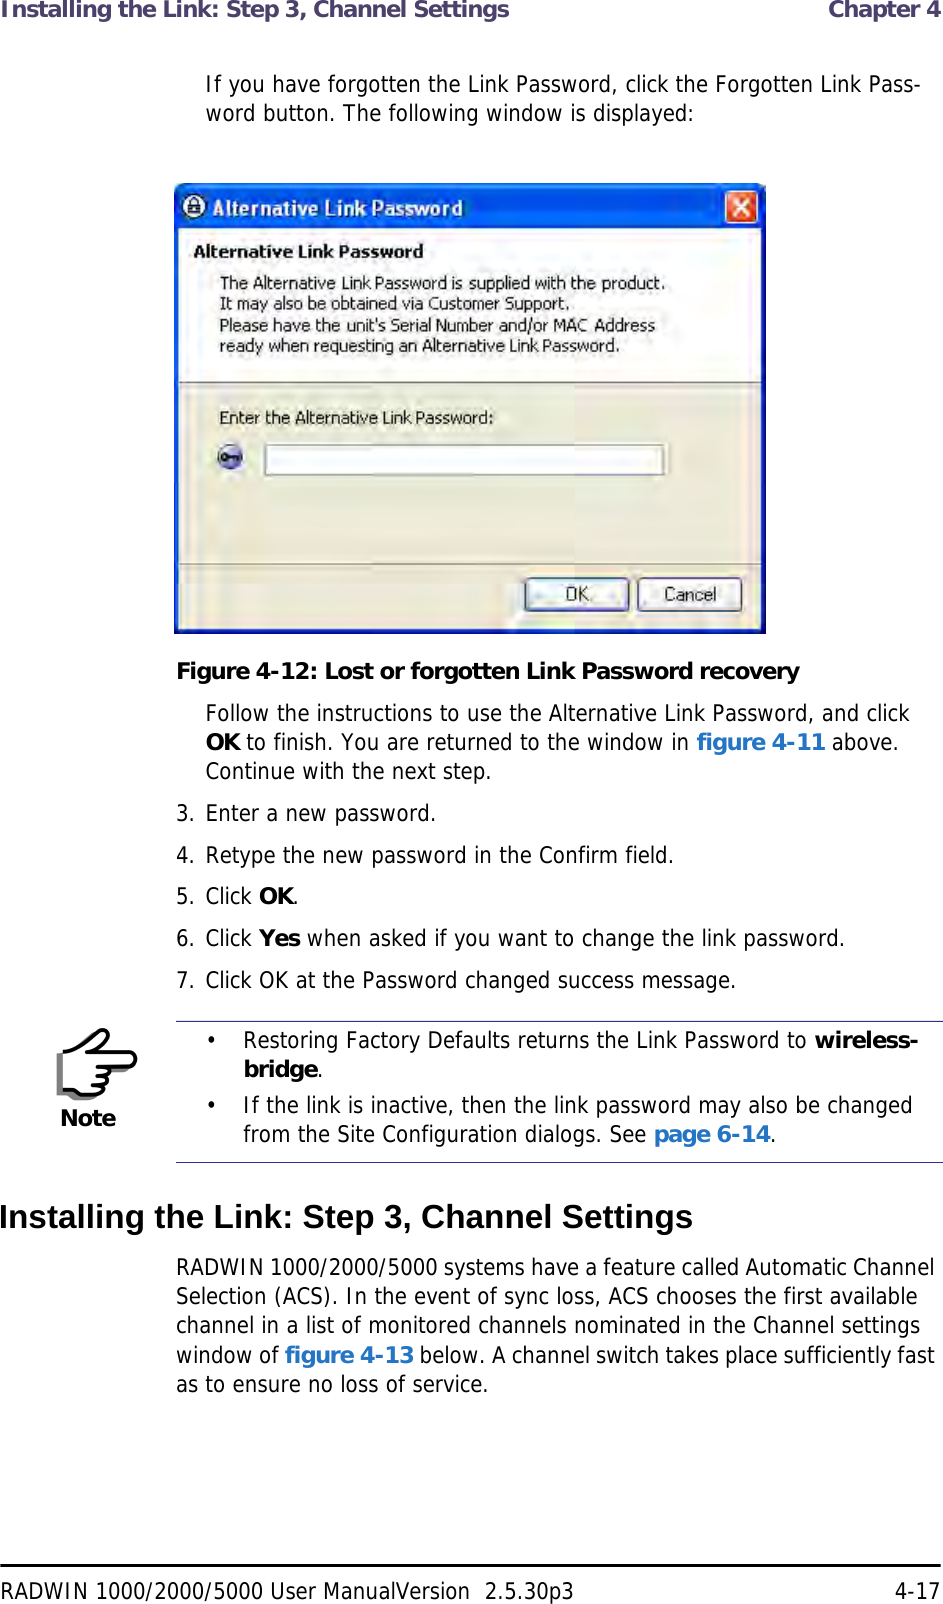 Installing the Link: Step 3, Channel Settings  Chapter 4RADWIN 1000/2000/5000 User ManualVersion  2.5.30p3 4-17If you have forgotten the Link Password, click the Forgotten Link Pass-word button. The following window is displayed:Figure 4-12: Lost or forgotten Link Password recoveryFollow the instructions to use the Alternative Link Password, and click OK to finish. You are returned to the window in figure 4-11 above. Continue with the next step.3. Enter a new password.4. Retype the new password in the Confirm field.5. Click OK.6. Click Yes when asked if you want to change the link password.7. Click OK at the Password changed success message.Installing the Link: Step 3, Channel SettingsRADWIN 1000/2000/5000 systems have a feature called Automatic Channel Selection (ACS). In the event of sync loss, ACS chooses the first available channel in a list of monitored channels nominated in the Channel settings window of figure 4-13 below. A channel switch takes place sufficiently fast as to ensure no loss of service.Note• Restoring Factory Defaults returns the Link Password to wireless-bridge.• If the link is inactive, then the link password may also be changed from the Site Configuration dialogs. See page 6-14.